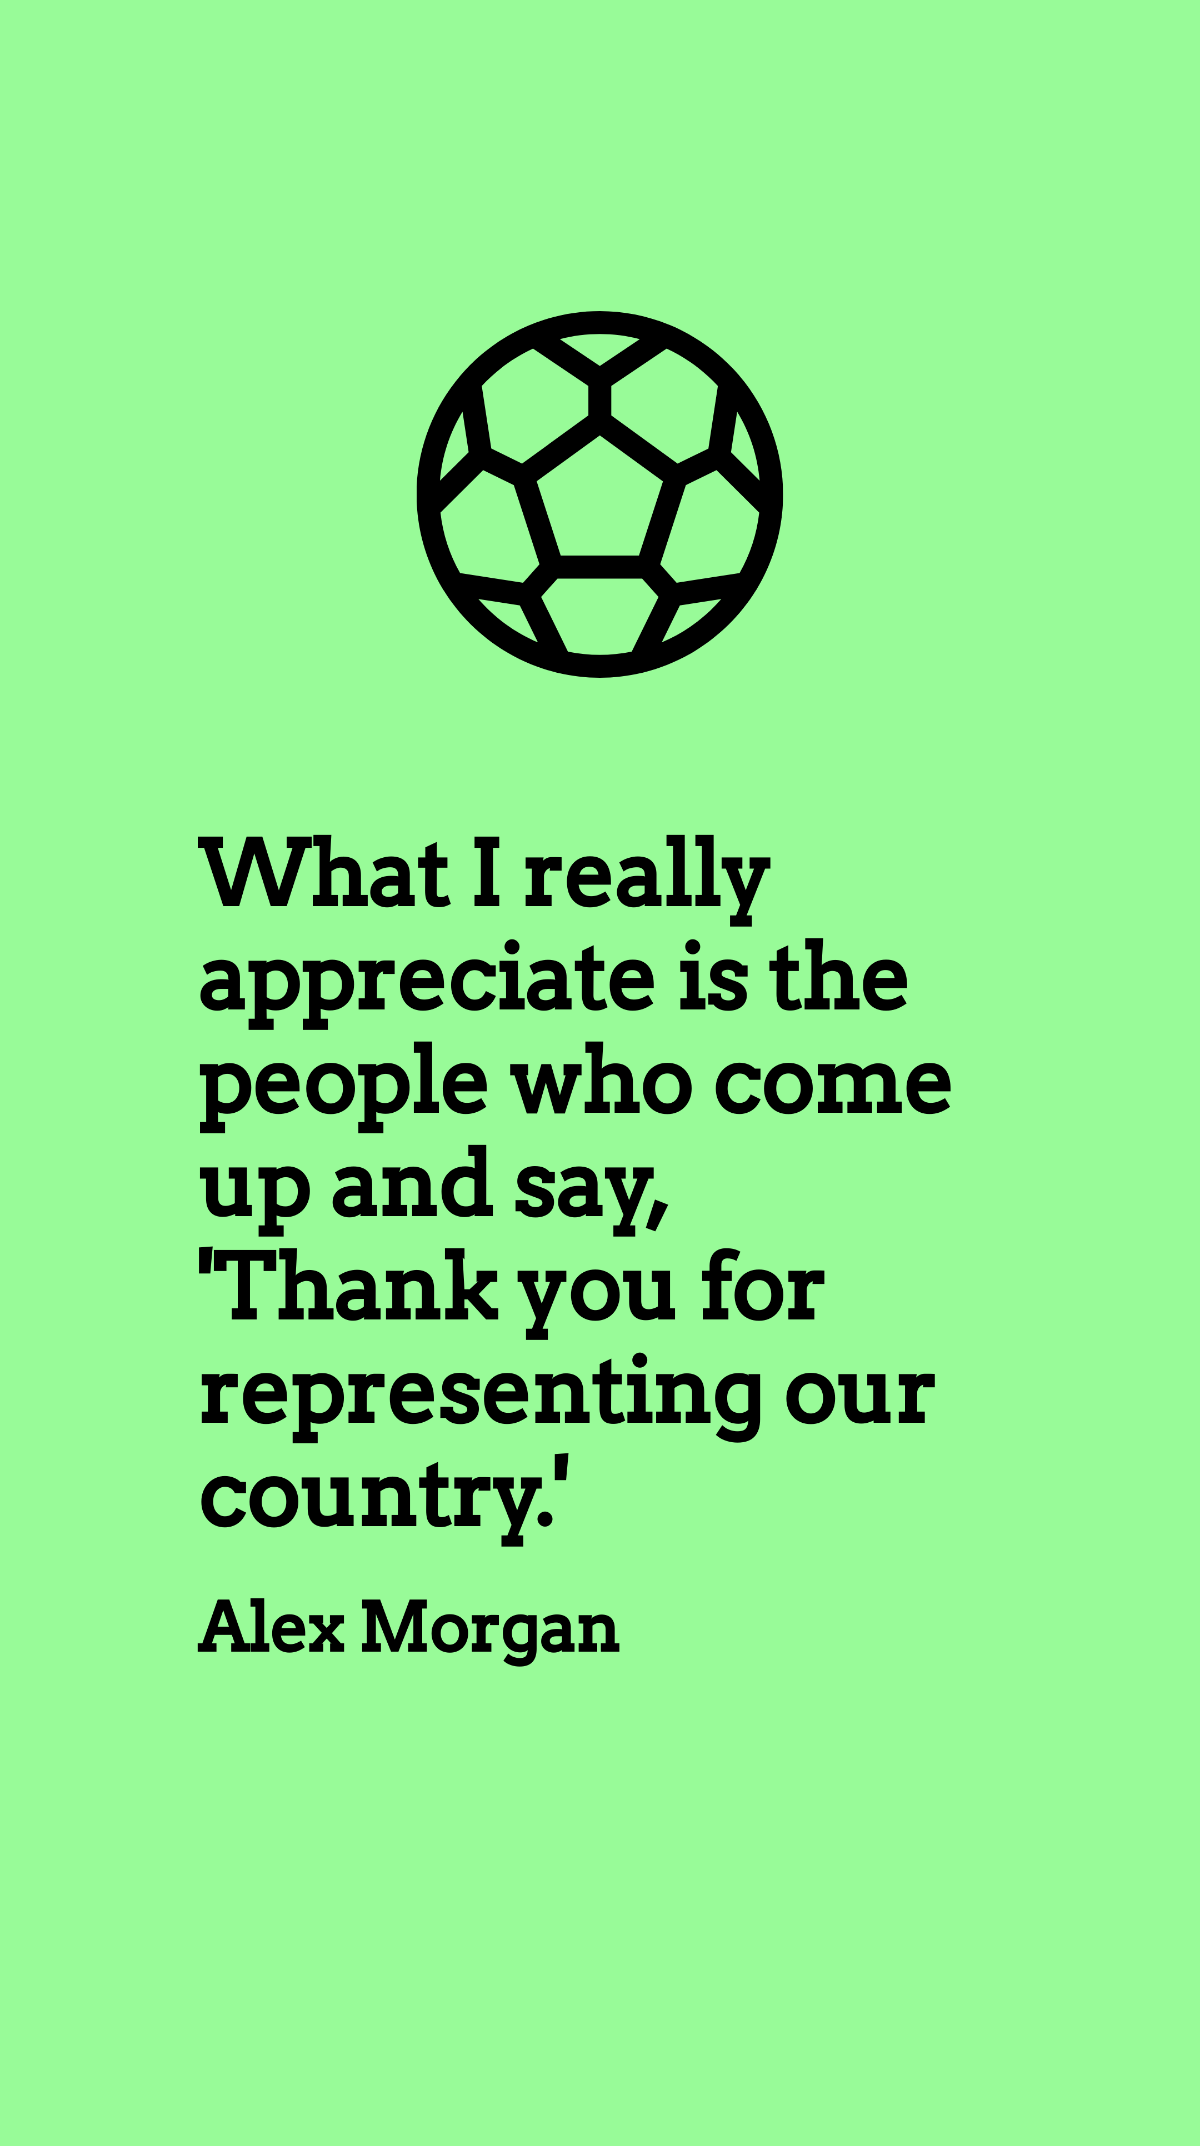 Alex Morgan - What I really appreciate is the people who come up and say, 'Thank you for representing our country.'